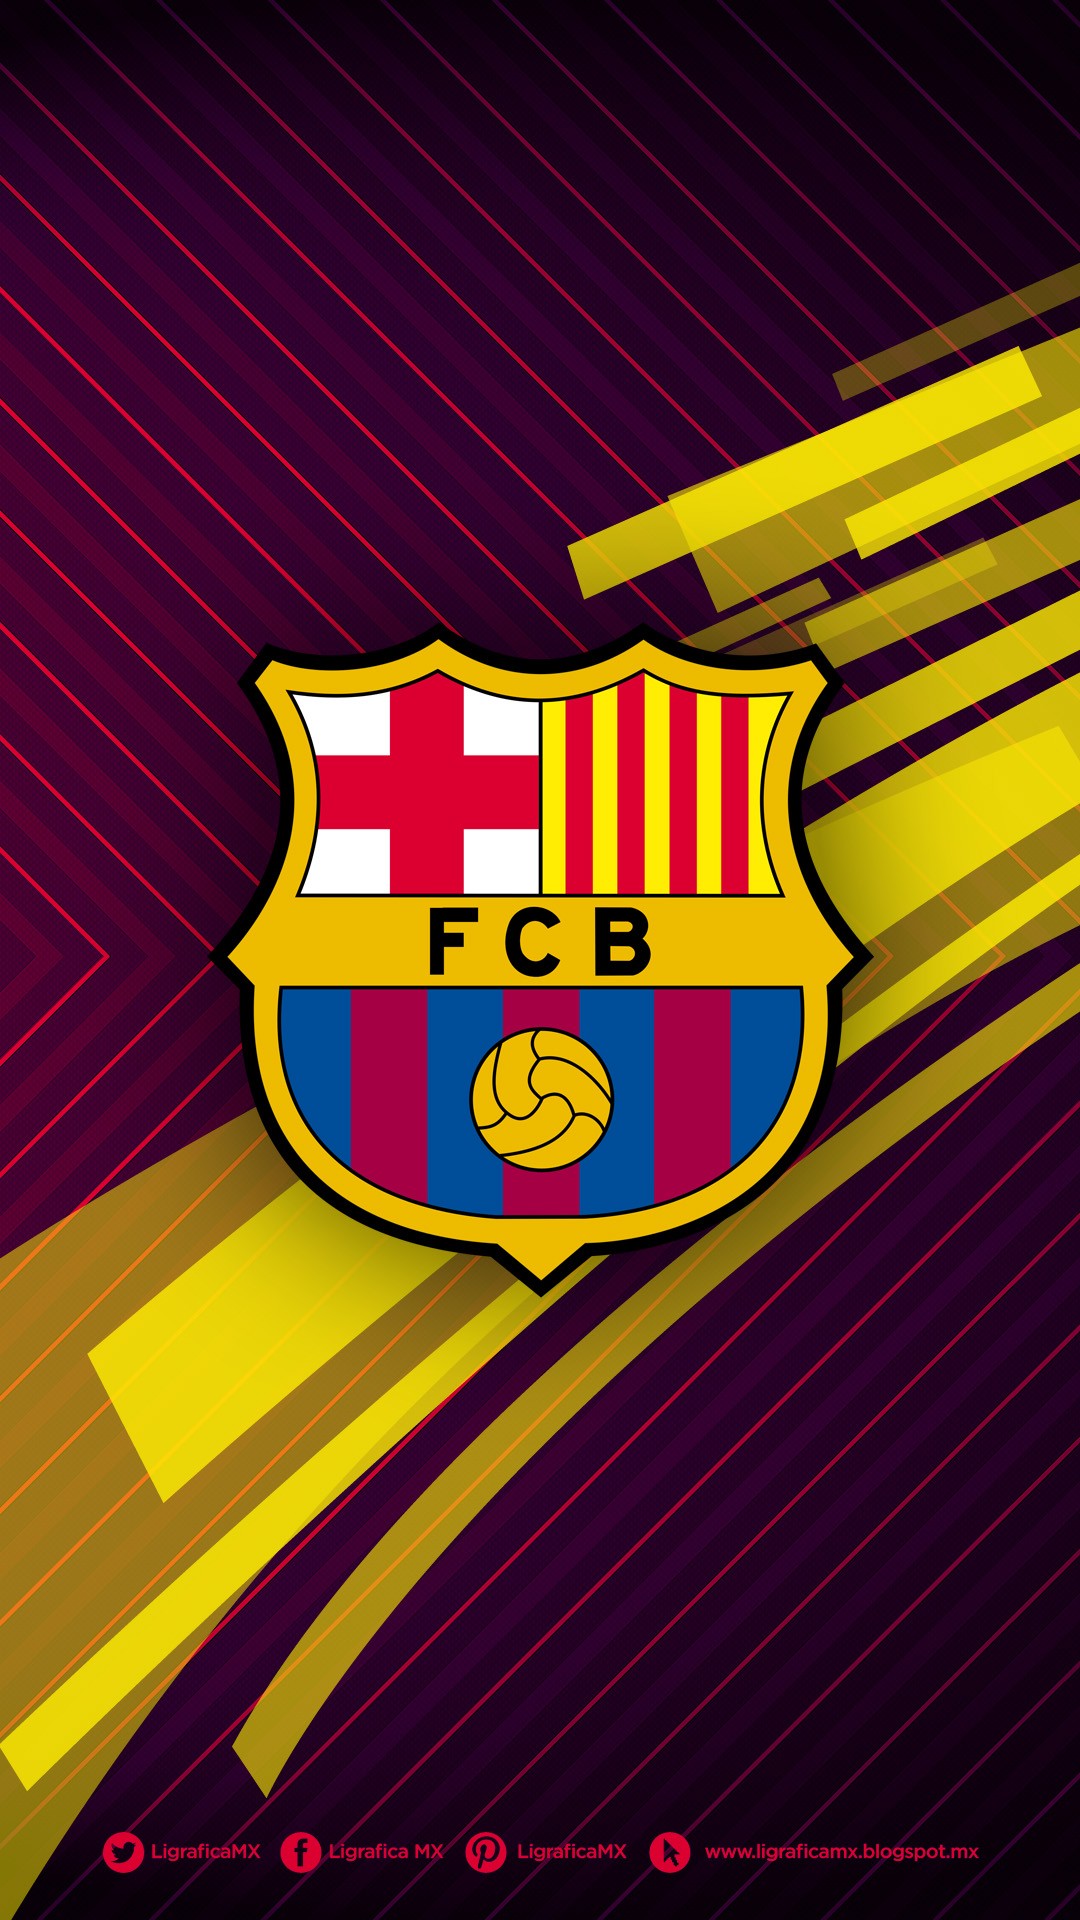 FC Barcelona wallpaper ·① Download free wallpapers for ...